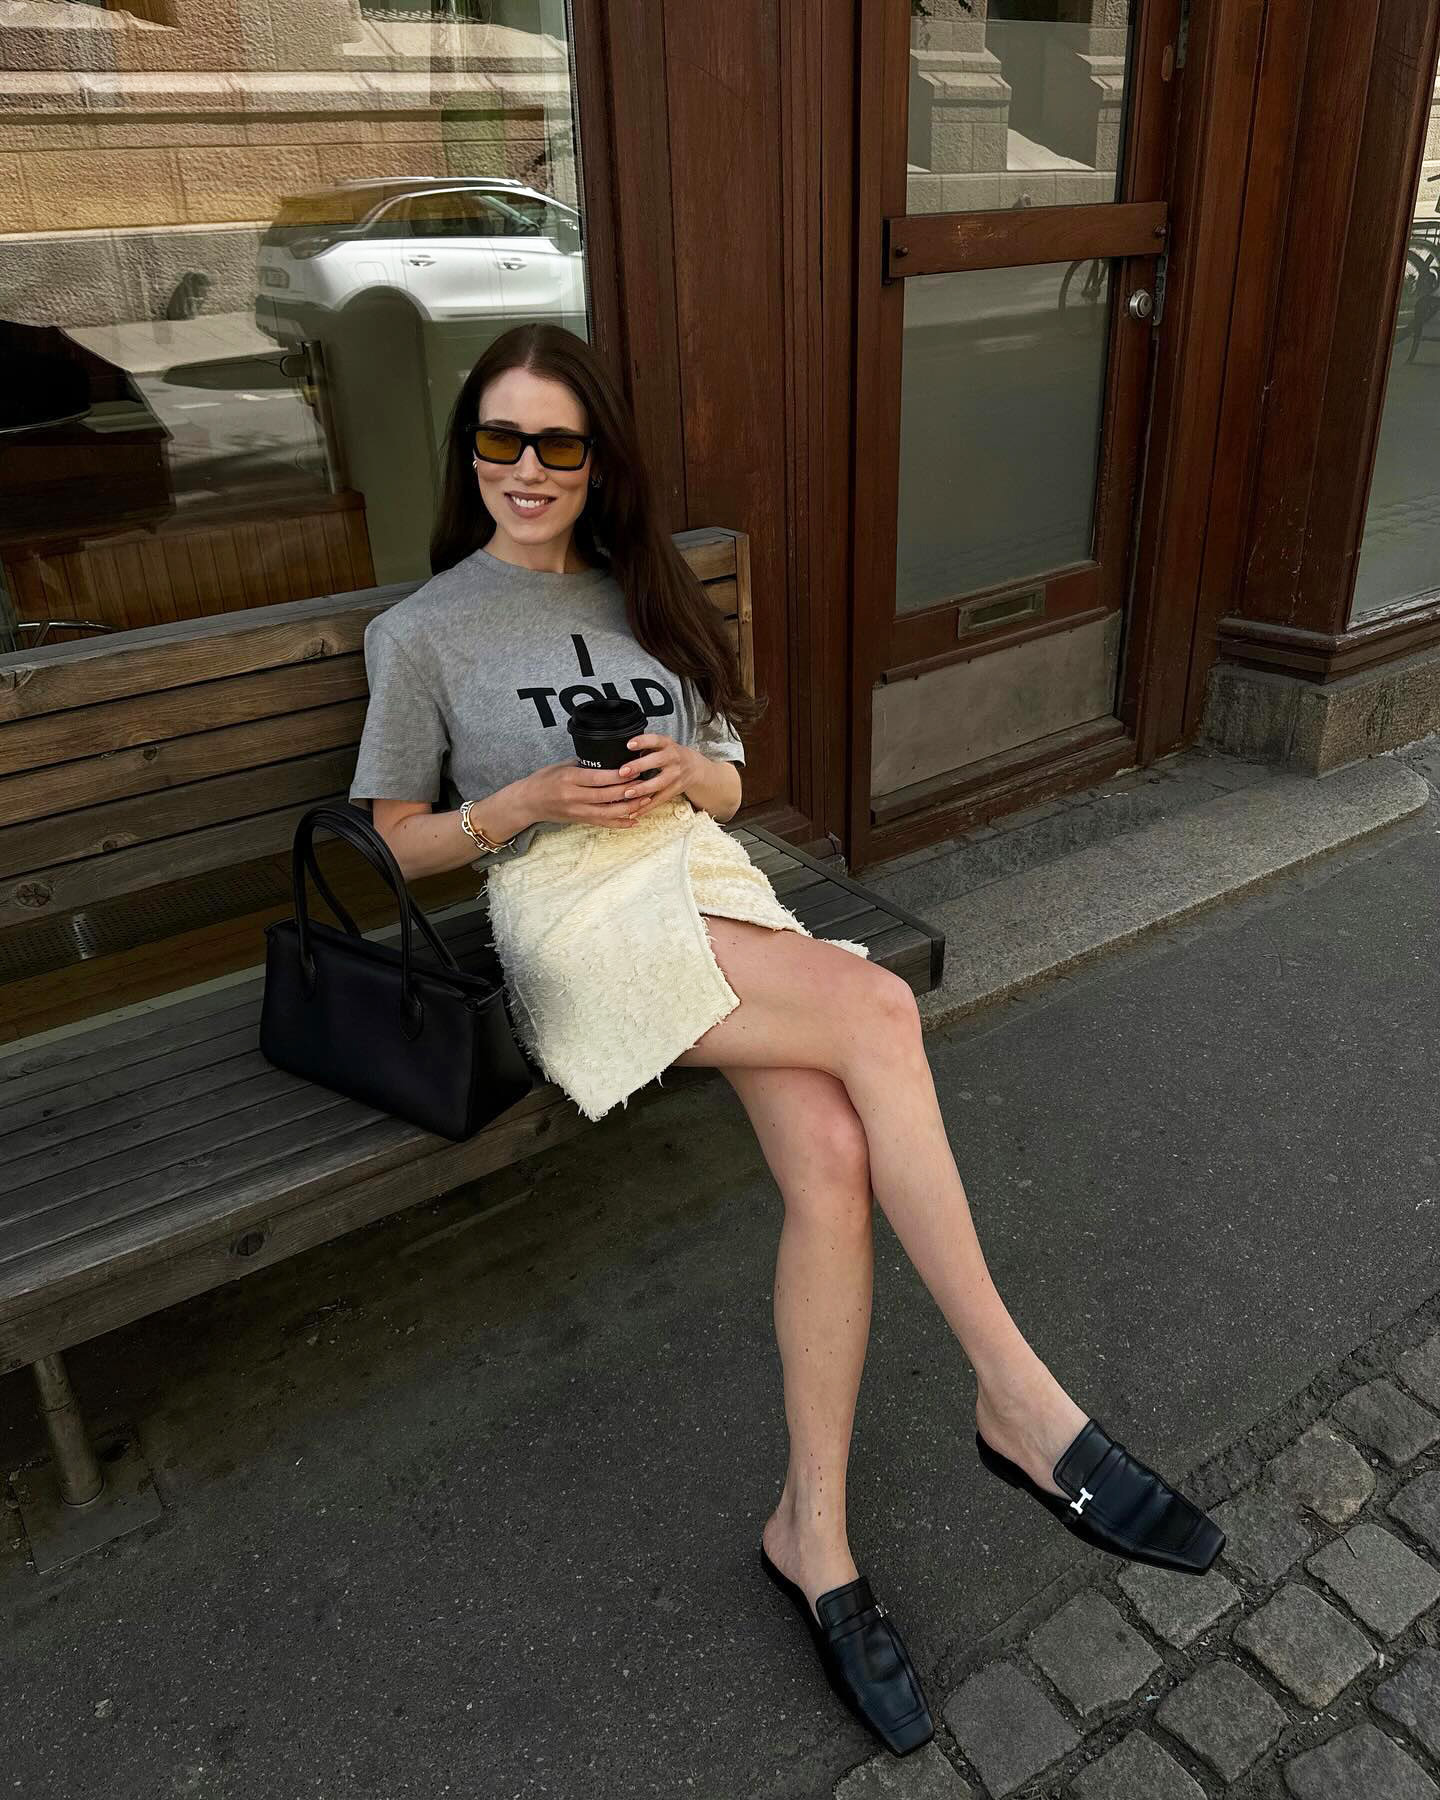 Woman wearing a grey T-shirt, miniskirt, and loafers